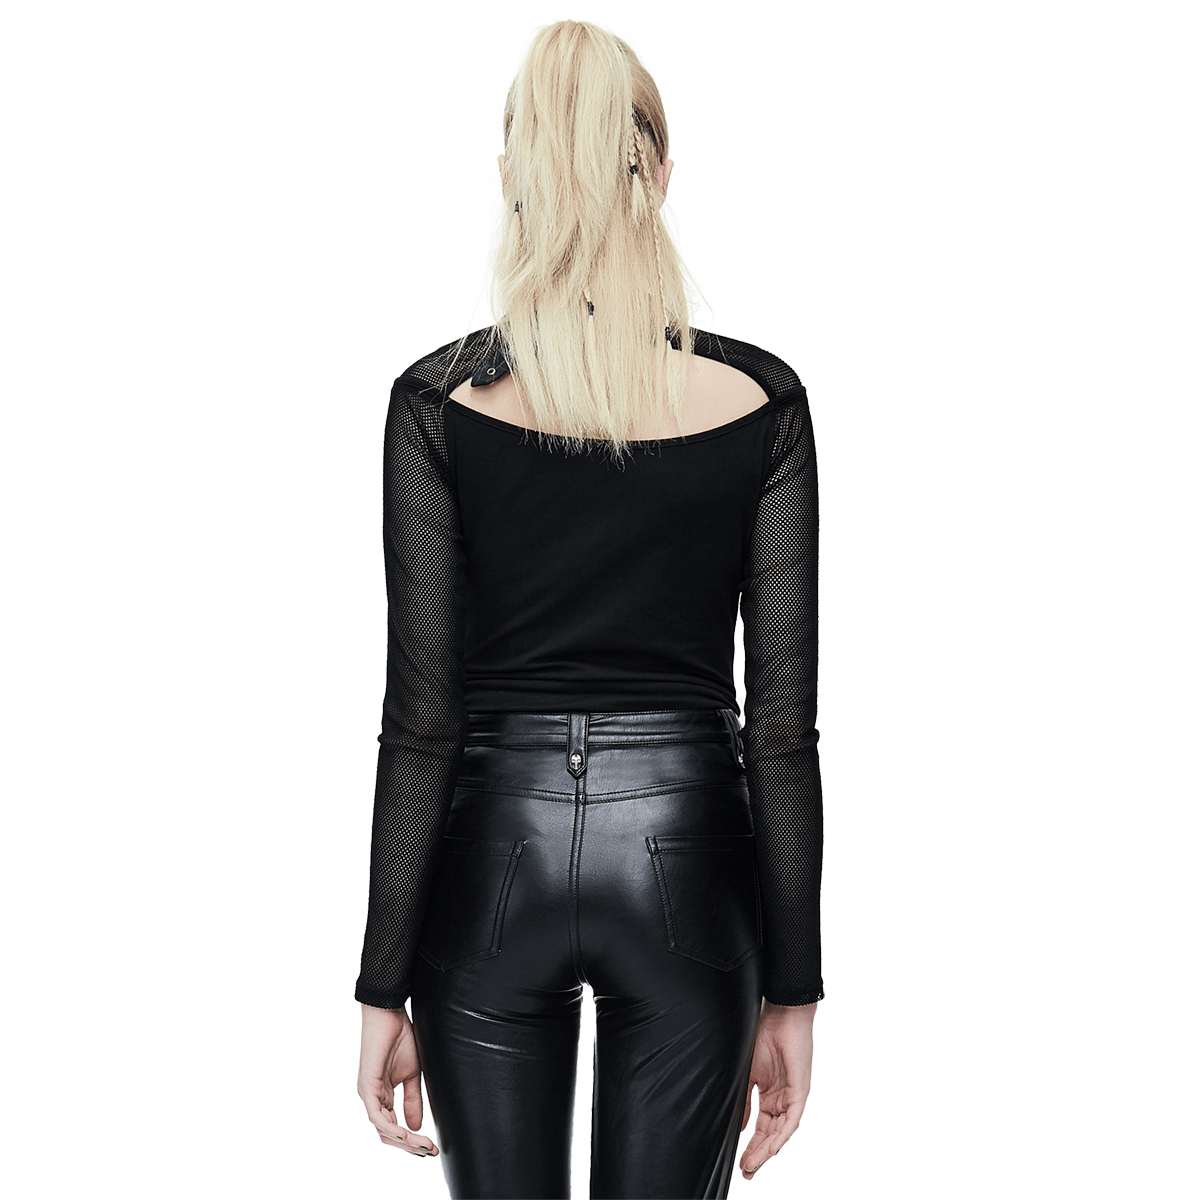 Fashion Sexy Women's Mesh Top with Spikes / Gothic Style Transparent Hollow-Out Slim-Fitting Tops - HARD'N'HEAVY